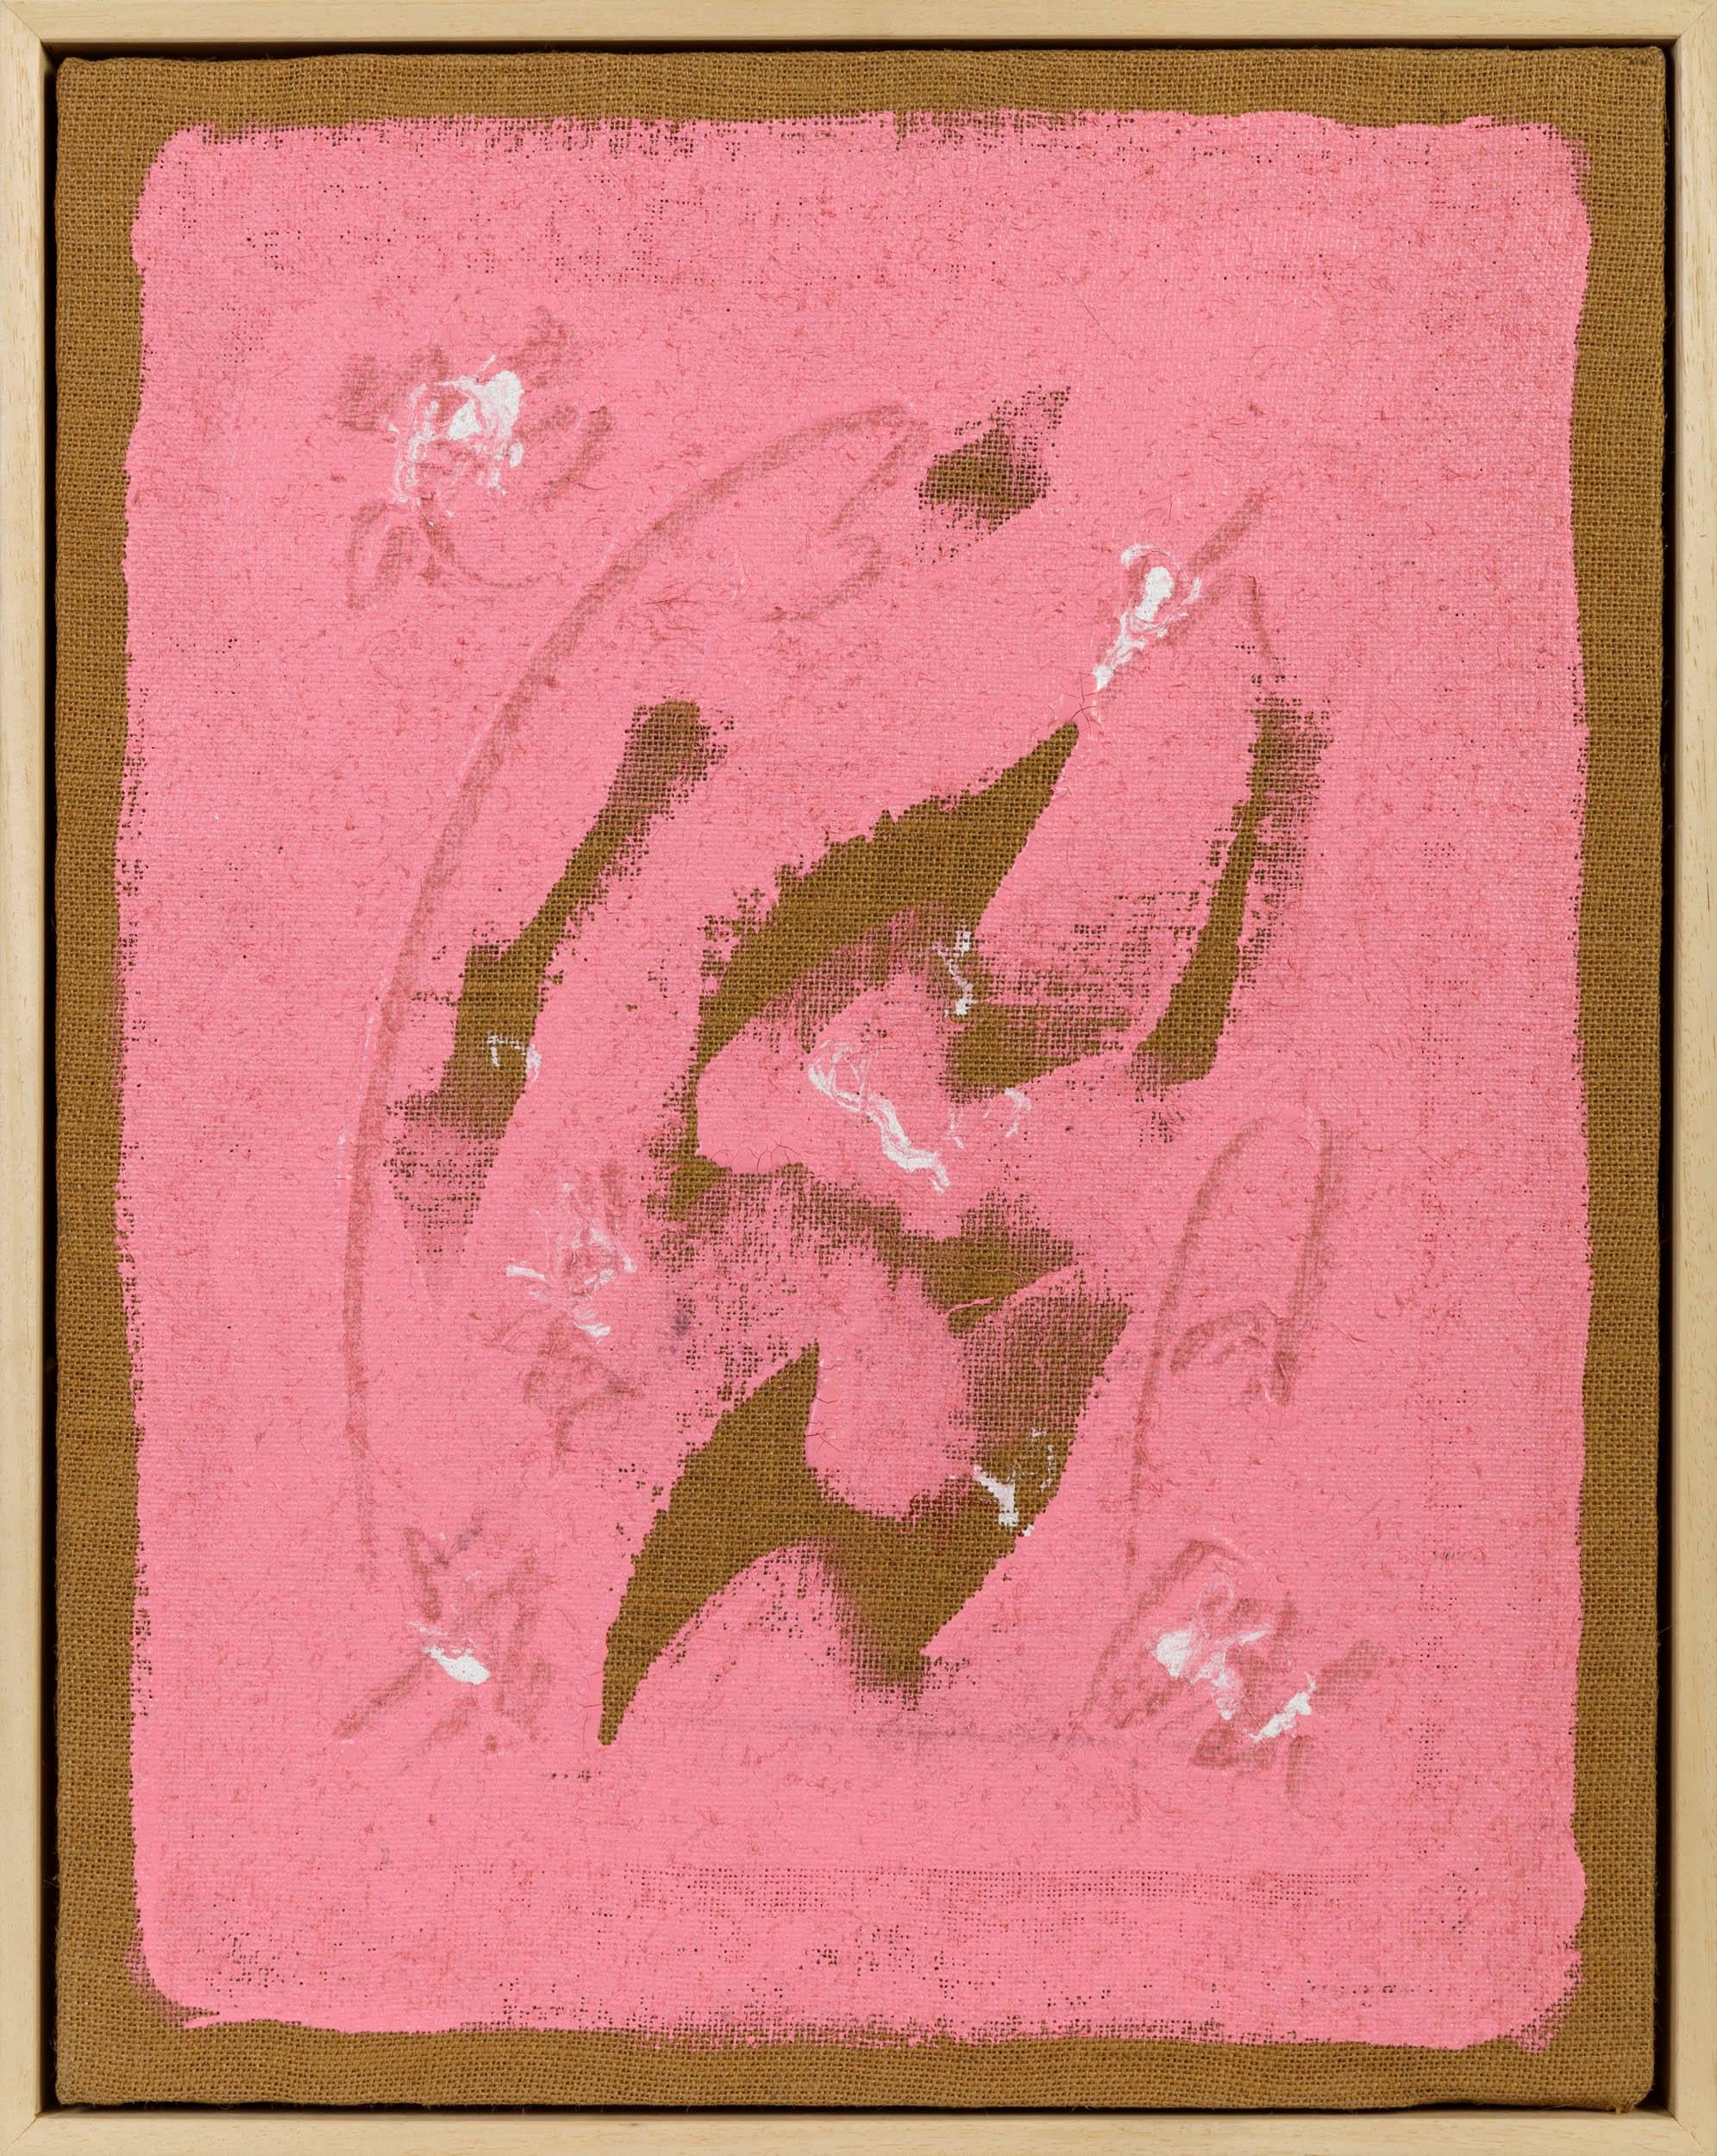 Salvatore Emblema Abstract Painting - Untitled, Pink, Jute Canvas